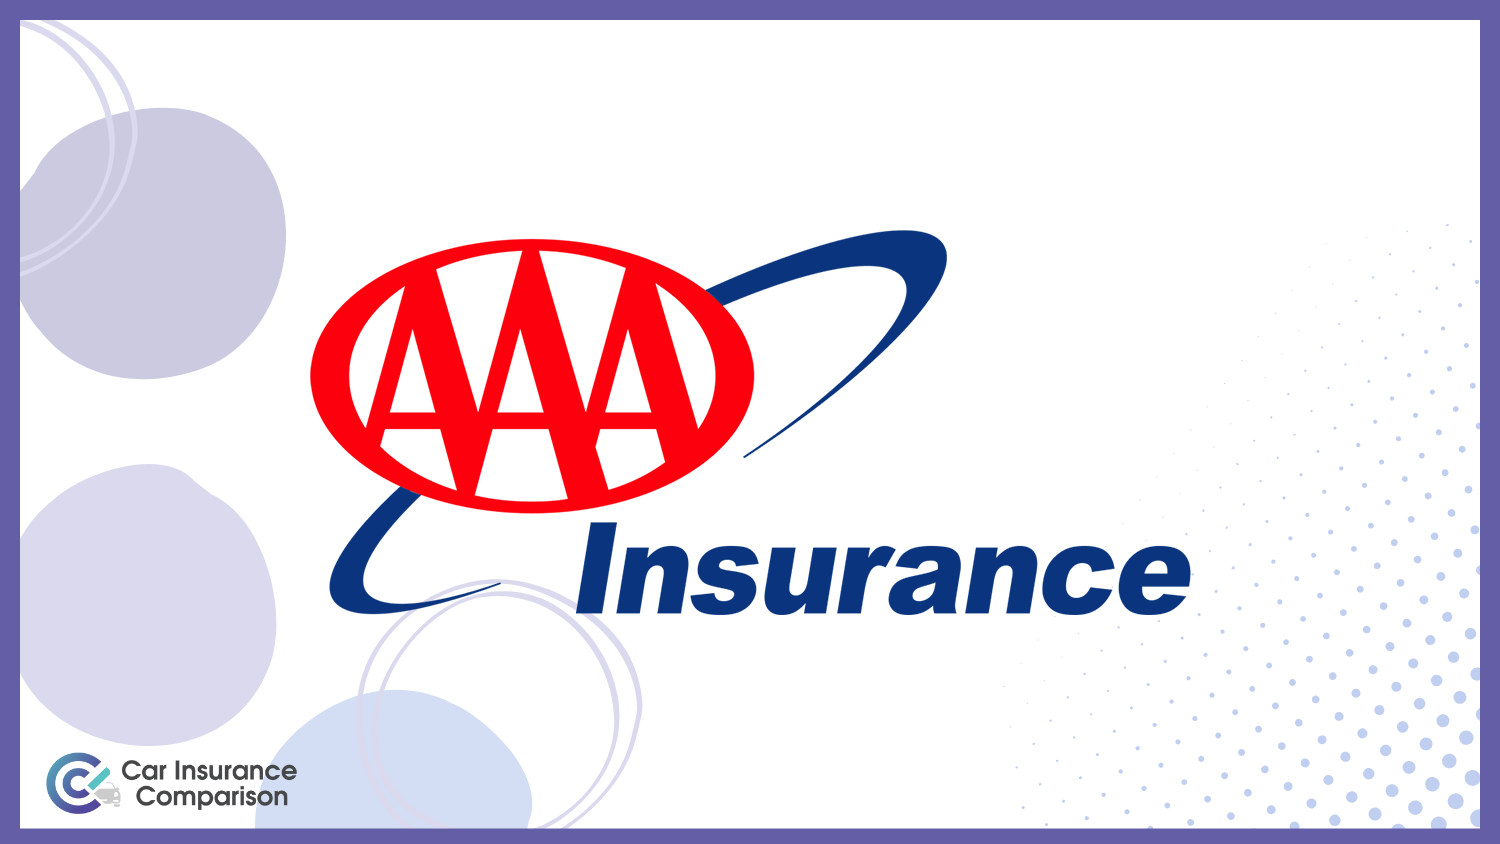 AAA: Best Car Insurance for 50-Year-Olds